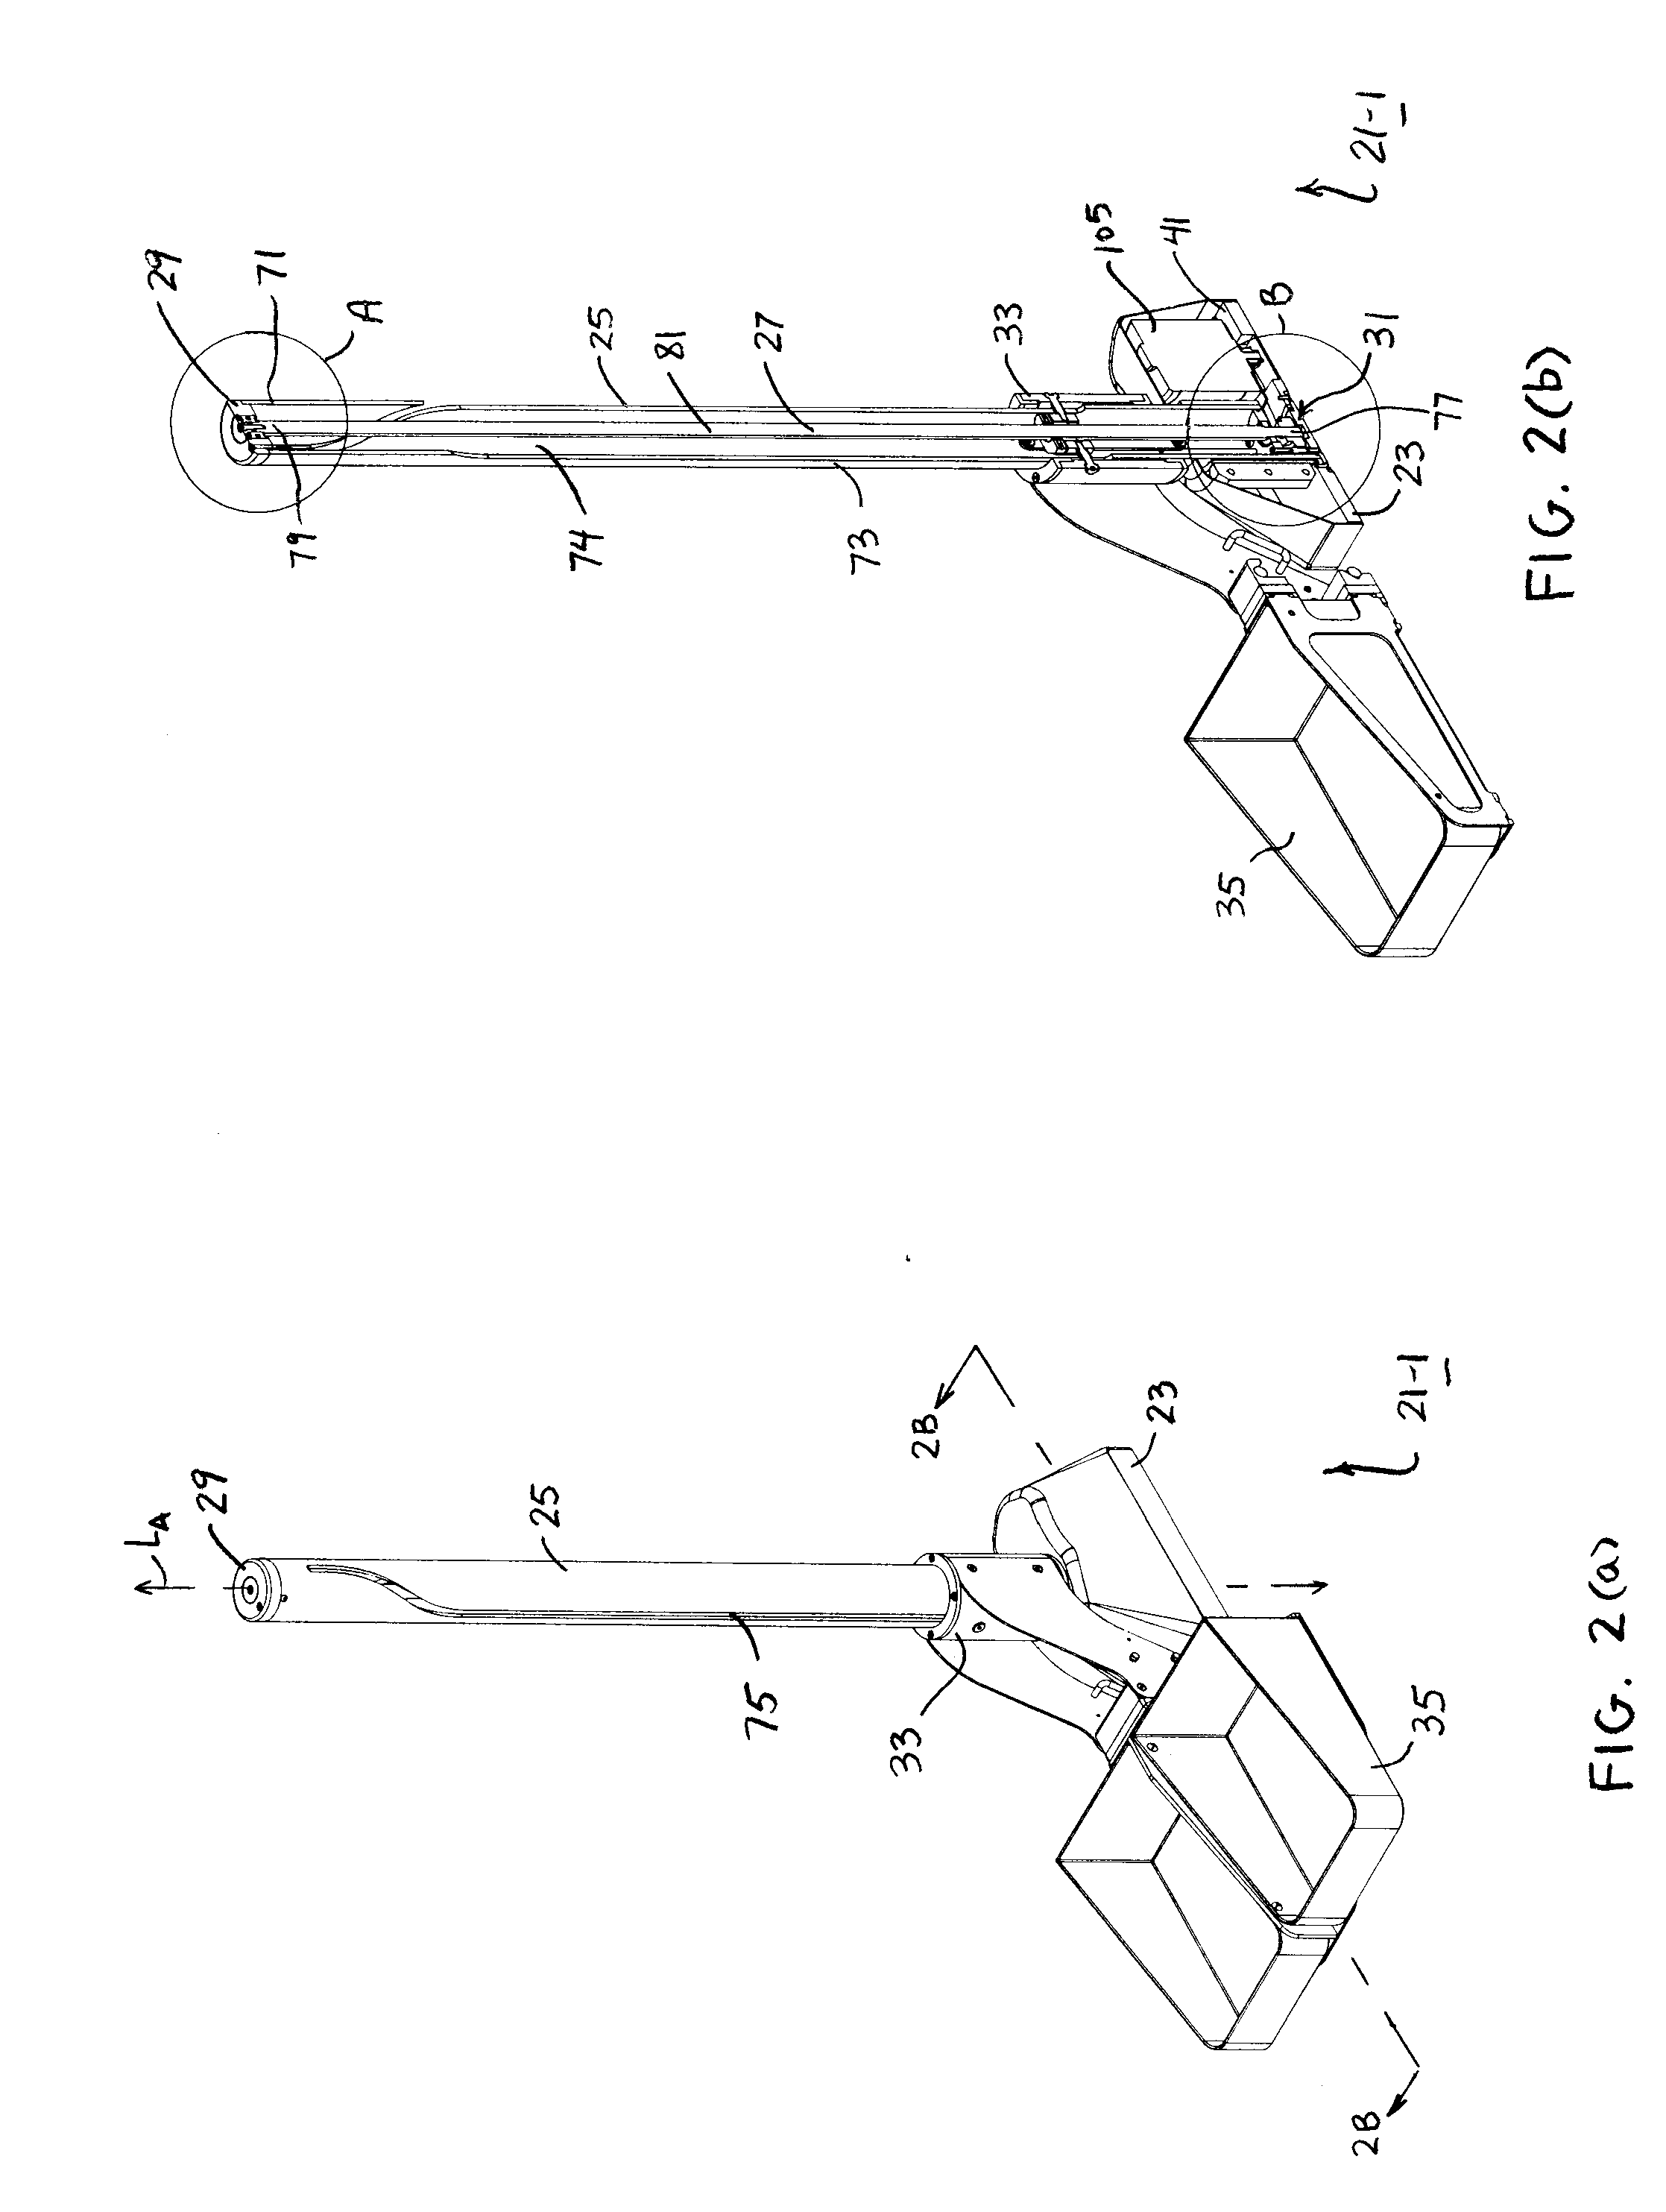 Fluid delivery system and lift for use in conjunction therewith